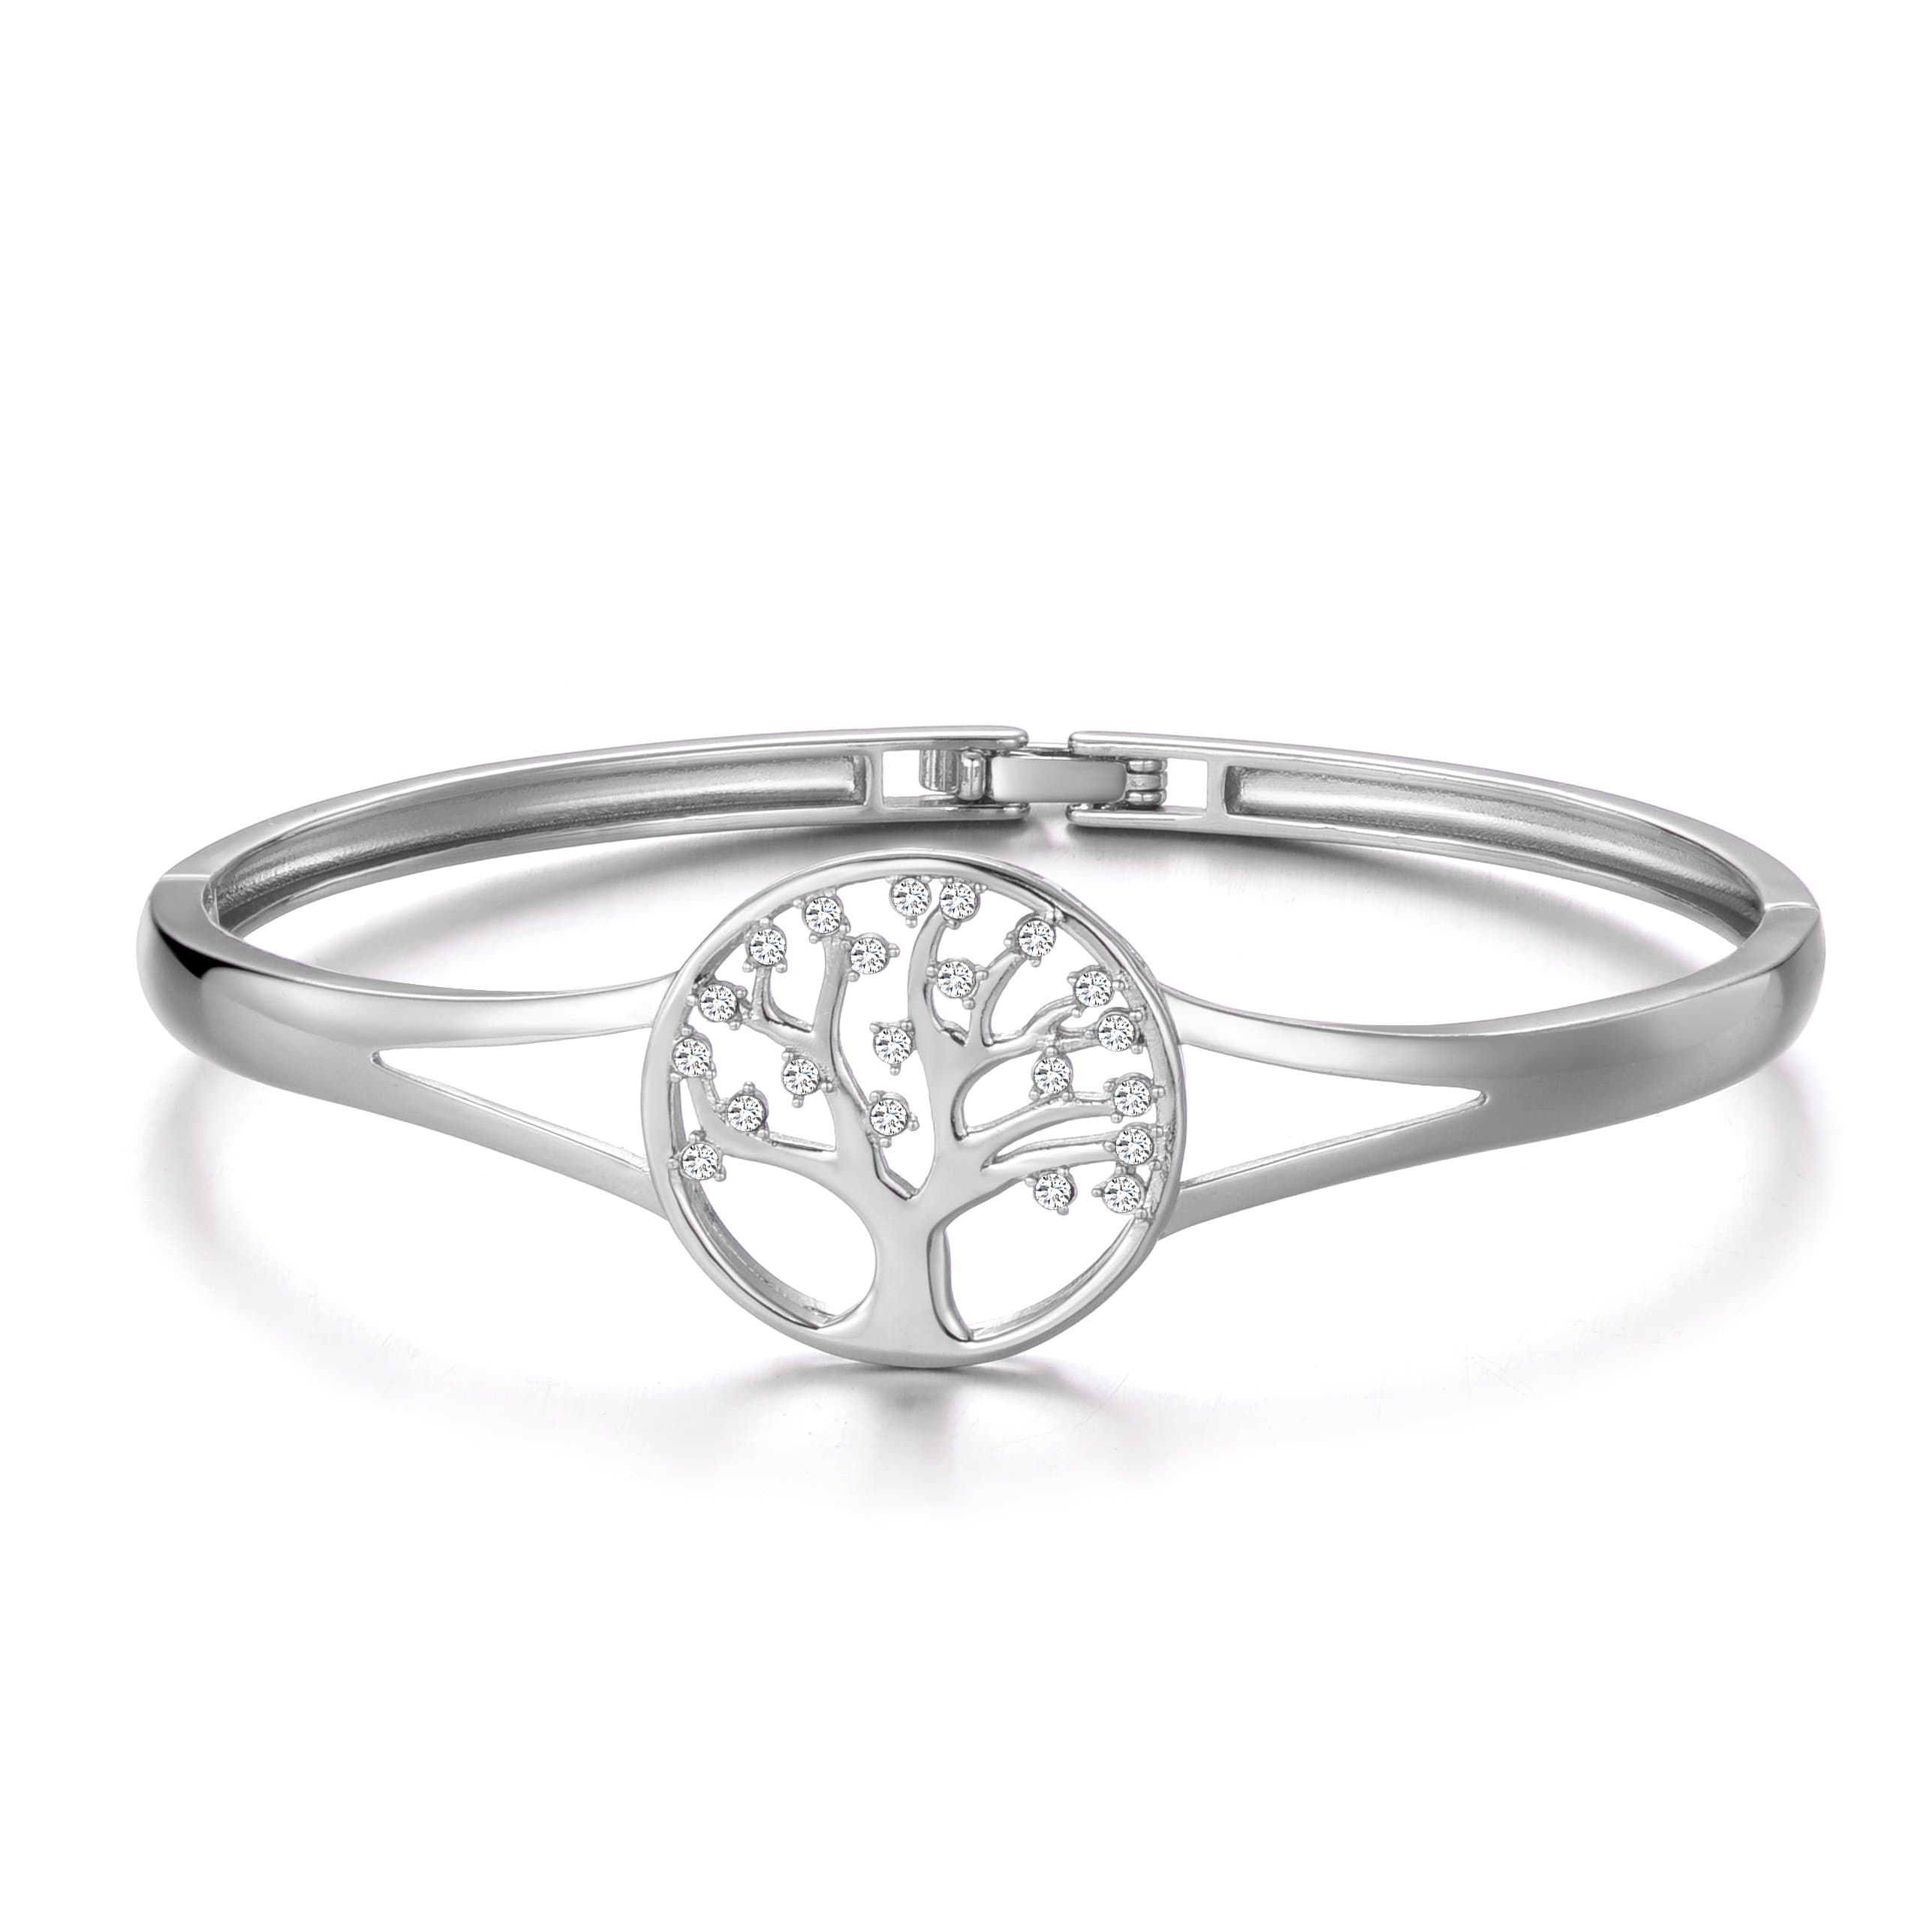 Silver Plated Tree of Life Cuff Bangle Created with Zircondia® Crystals by Philip Jones Jewellery